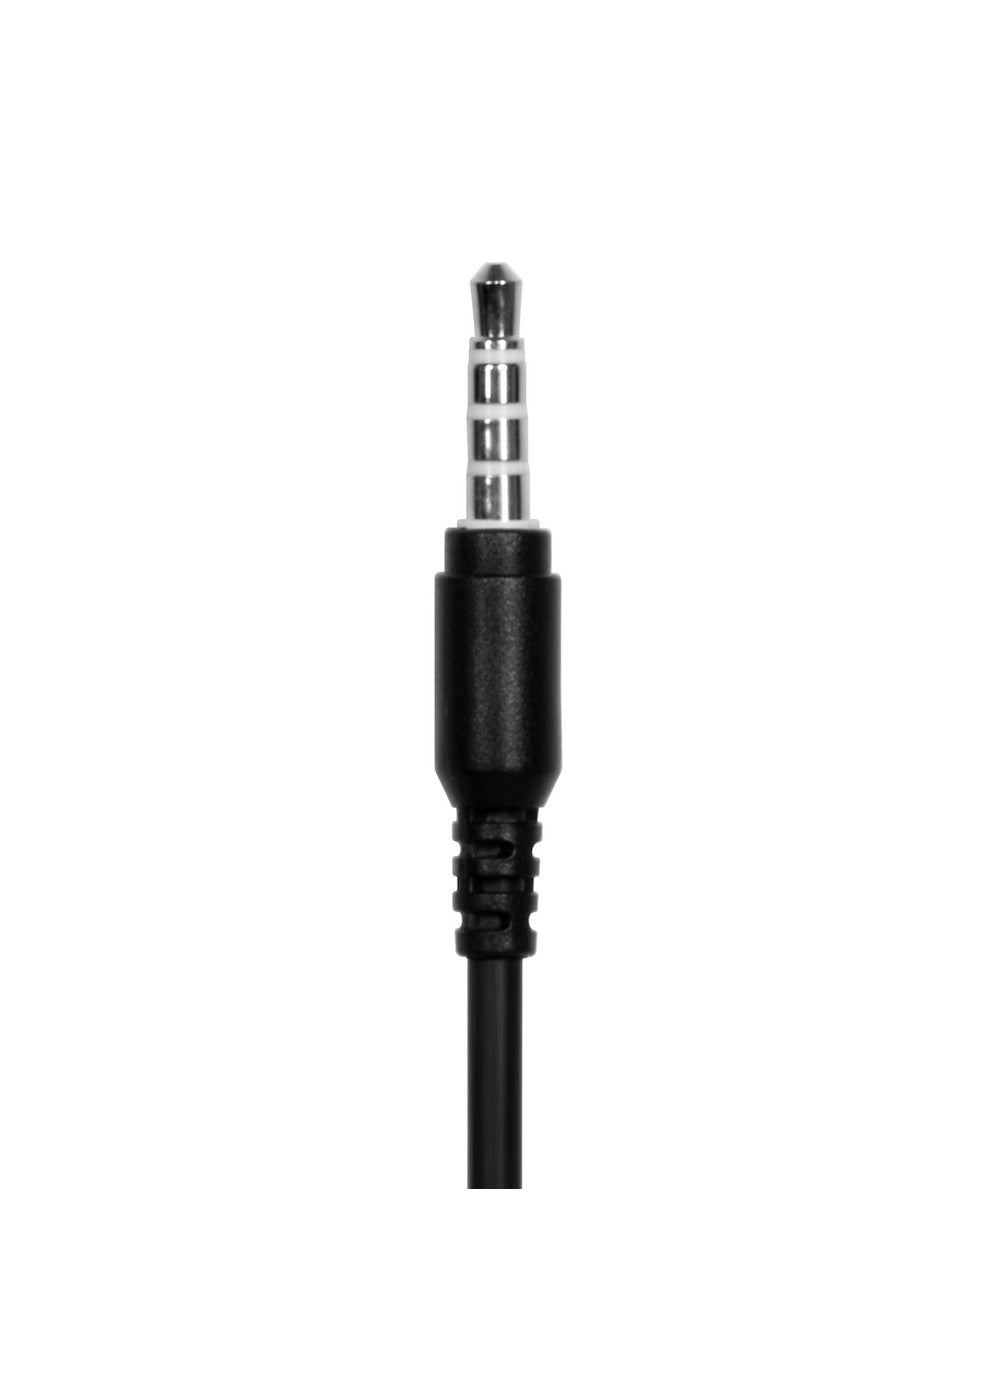 PORT HEADSET - STEREO - 3.5MM JACK CONNECTION